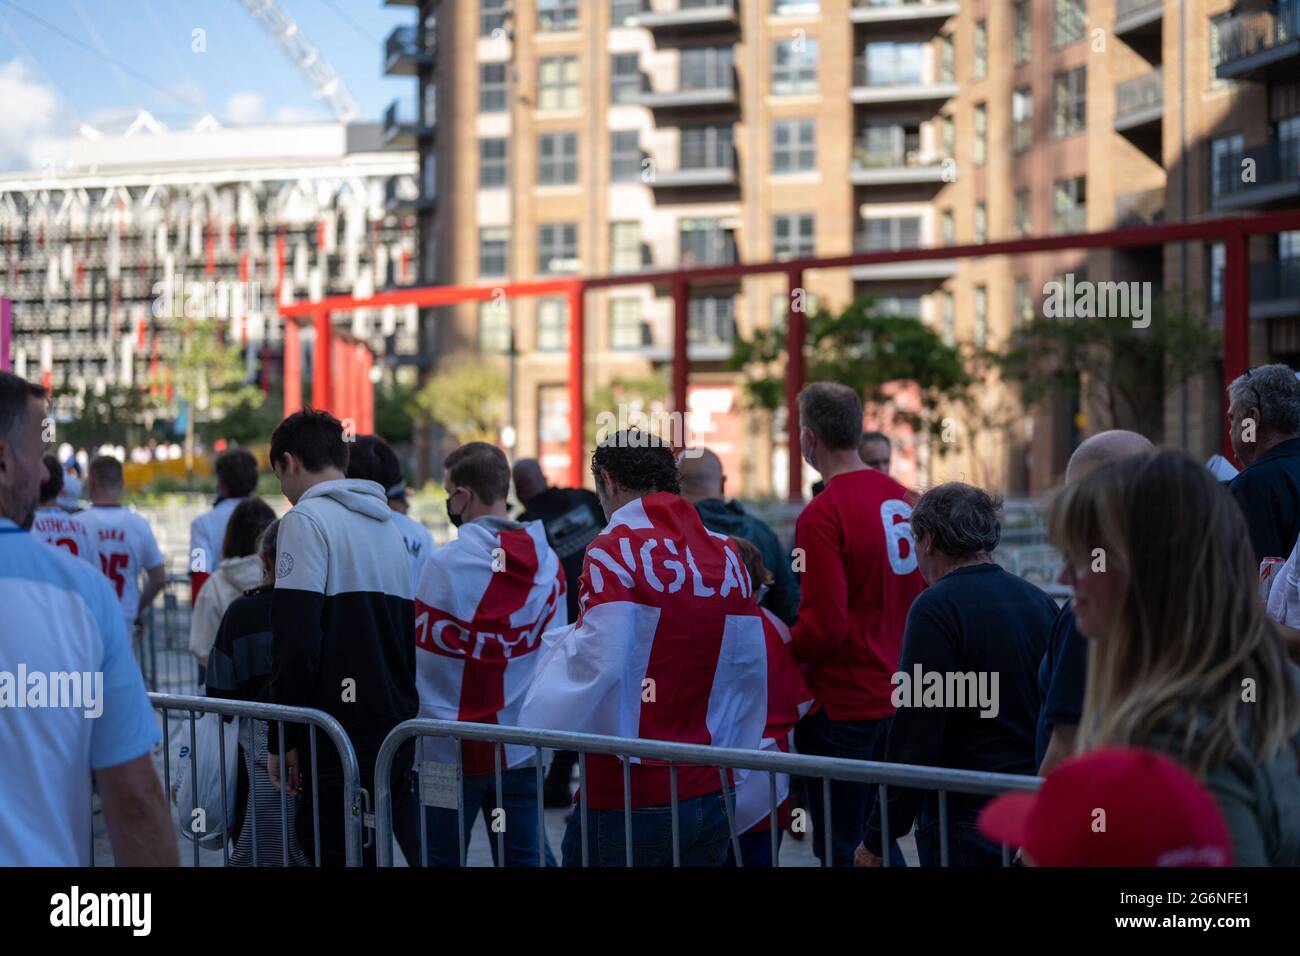 London, UK. 7th July 2021. England fans queuing to get into Wembley stadium. Credit: Thomas Eddy/Alamy Live News Stock Photo